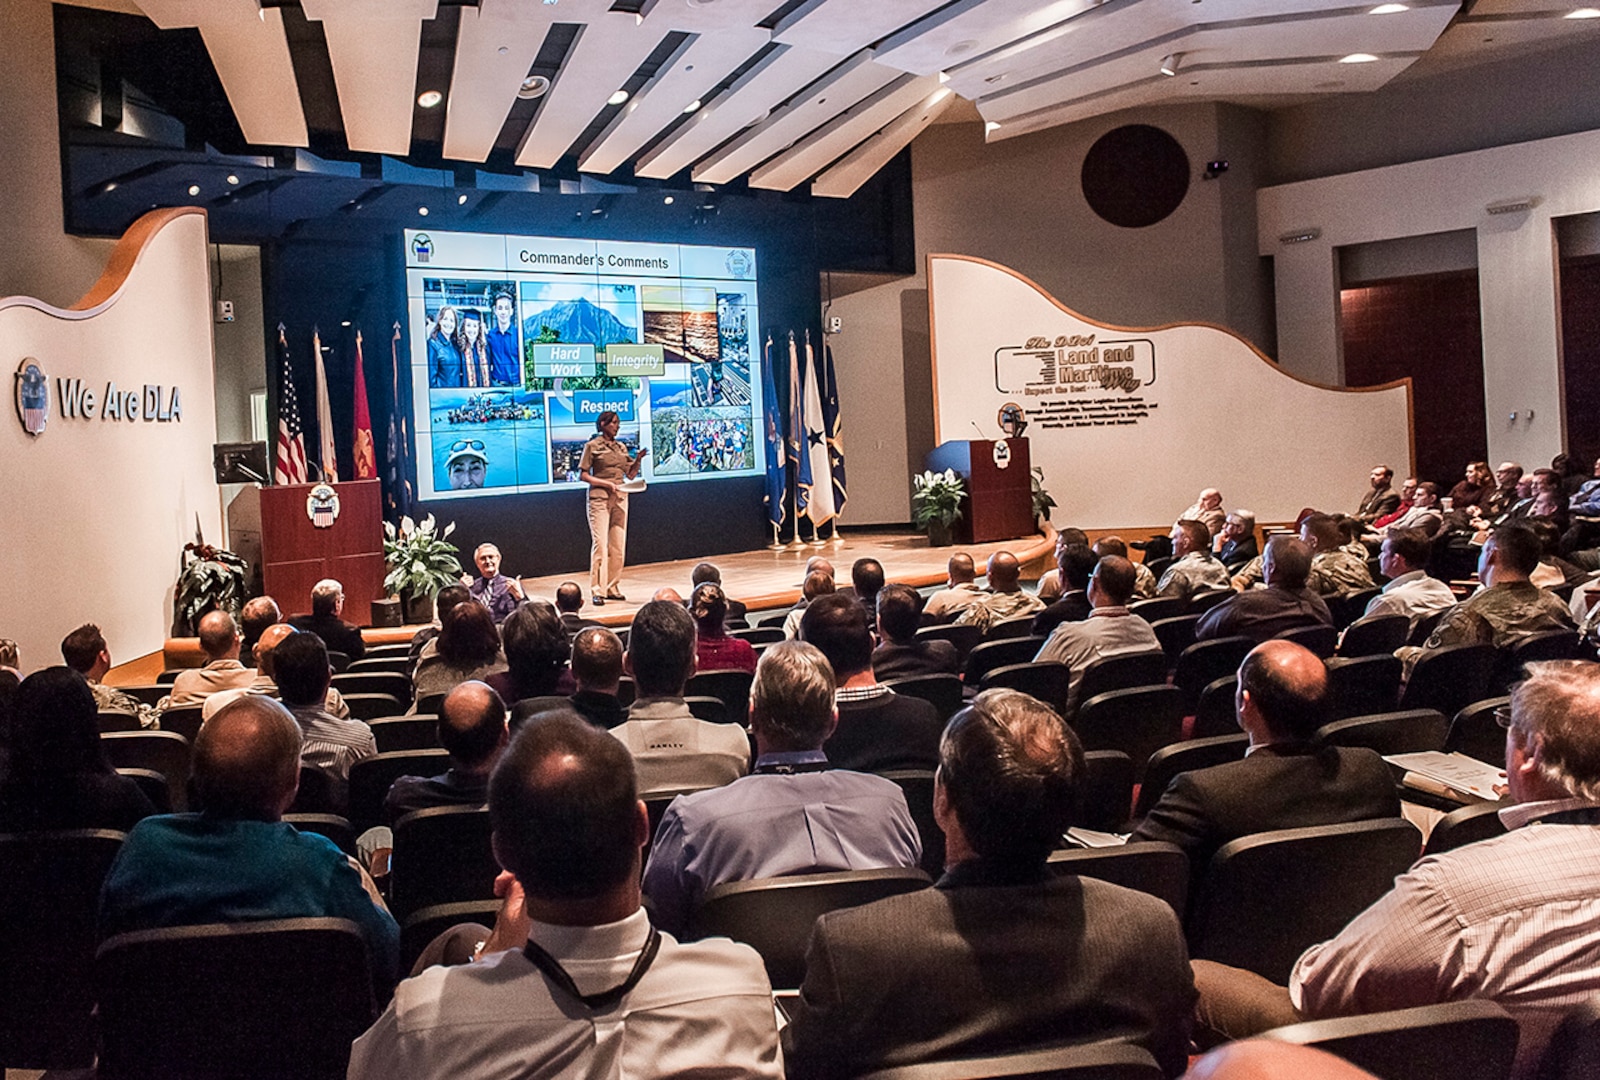 Navy Rear Adm. Michelle Skubic speaks at her first Town Hall as commander of DLA Land and Maritime. The Feb. 15 event provided updates on new DoD employee performance standards and the scheduled audit review currently underway across the agency.